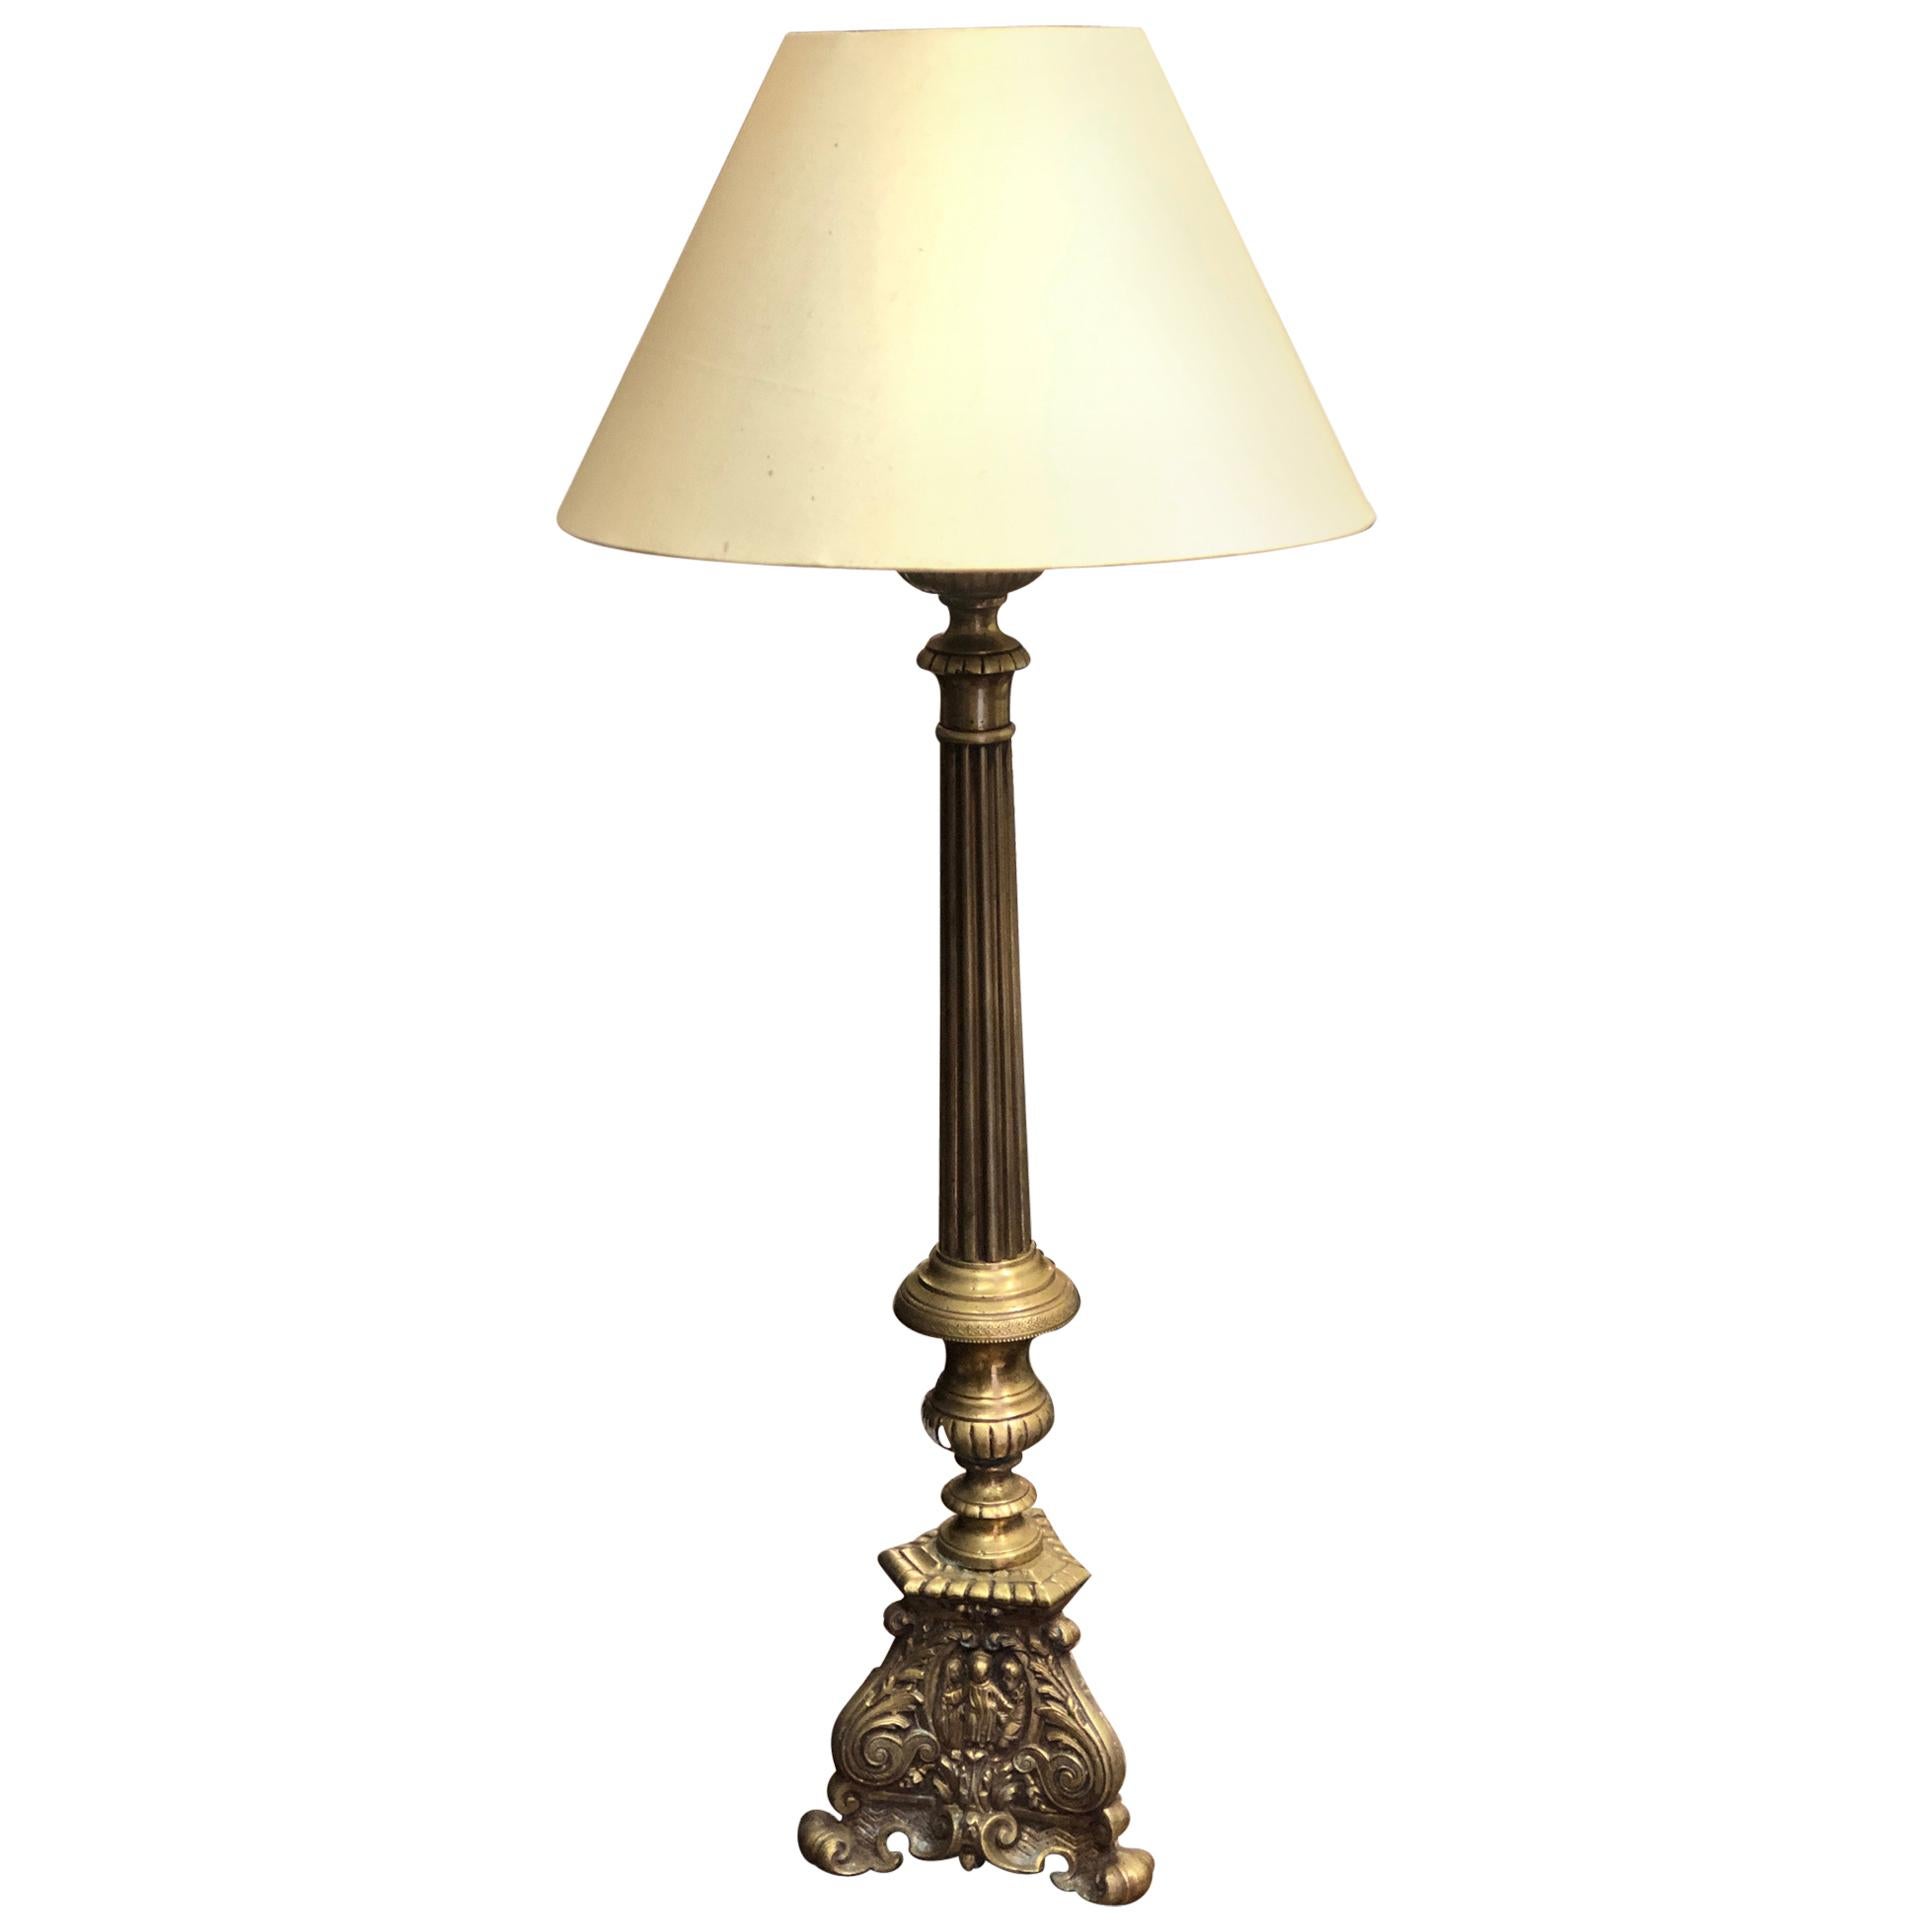 20th Century French Brass Table Lamp with Decorated Base